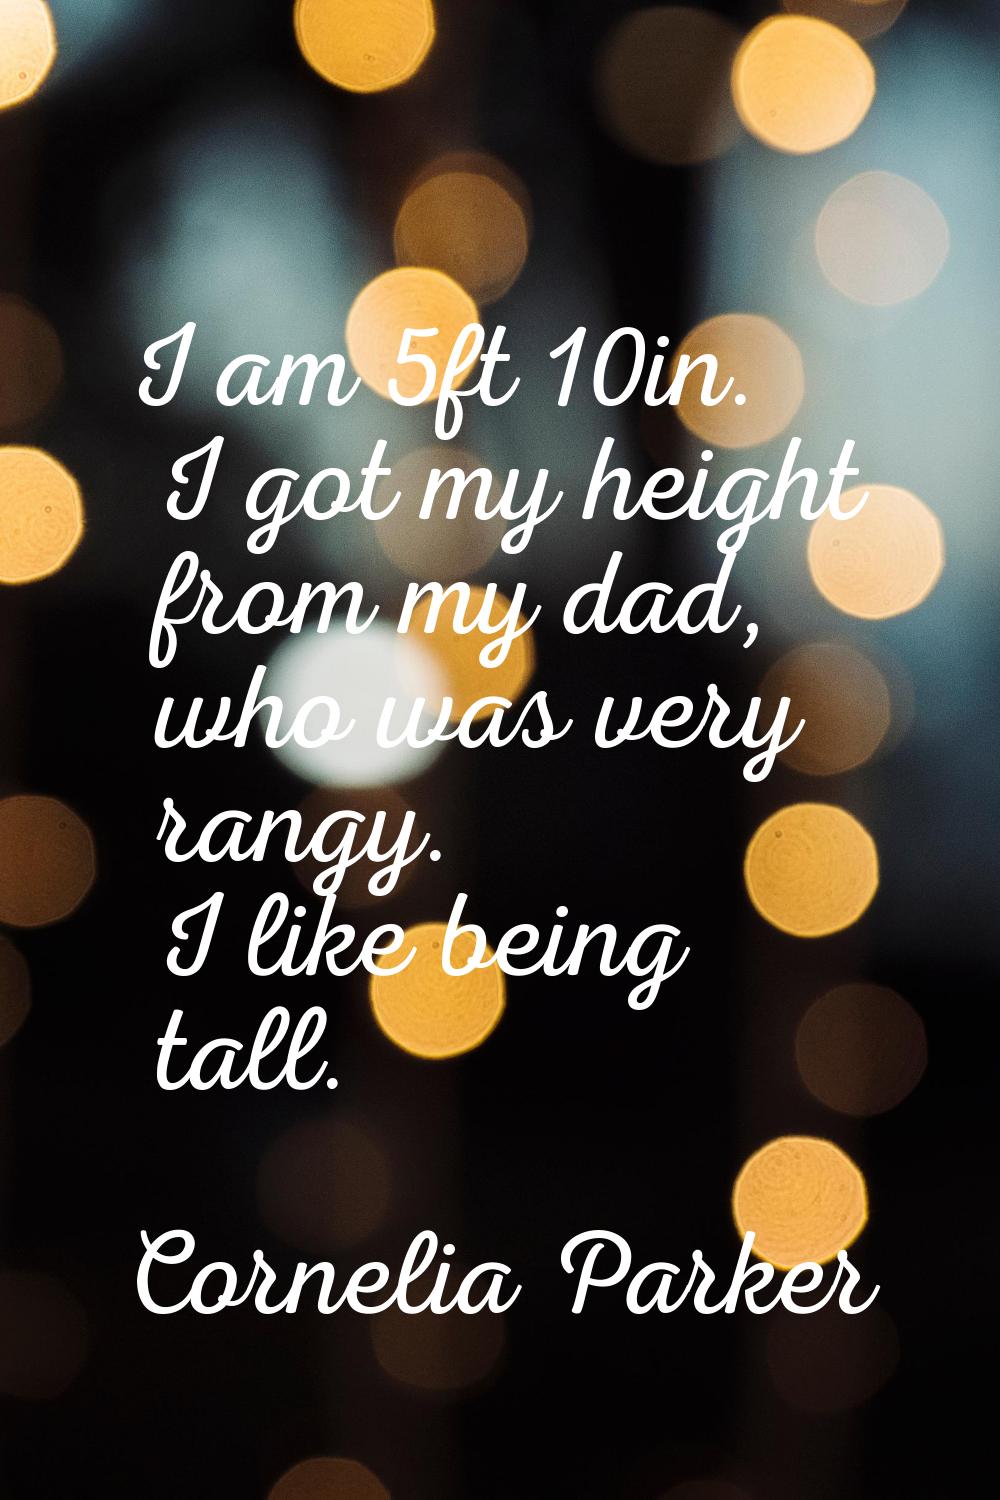 I am 5ft 10in. I got my height from my dad, who was very rangy. I like being tall.